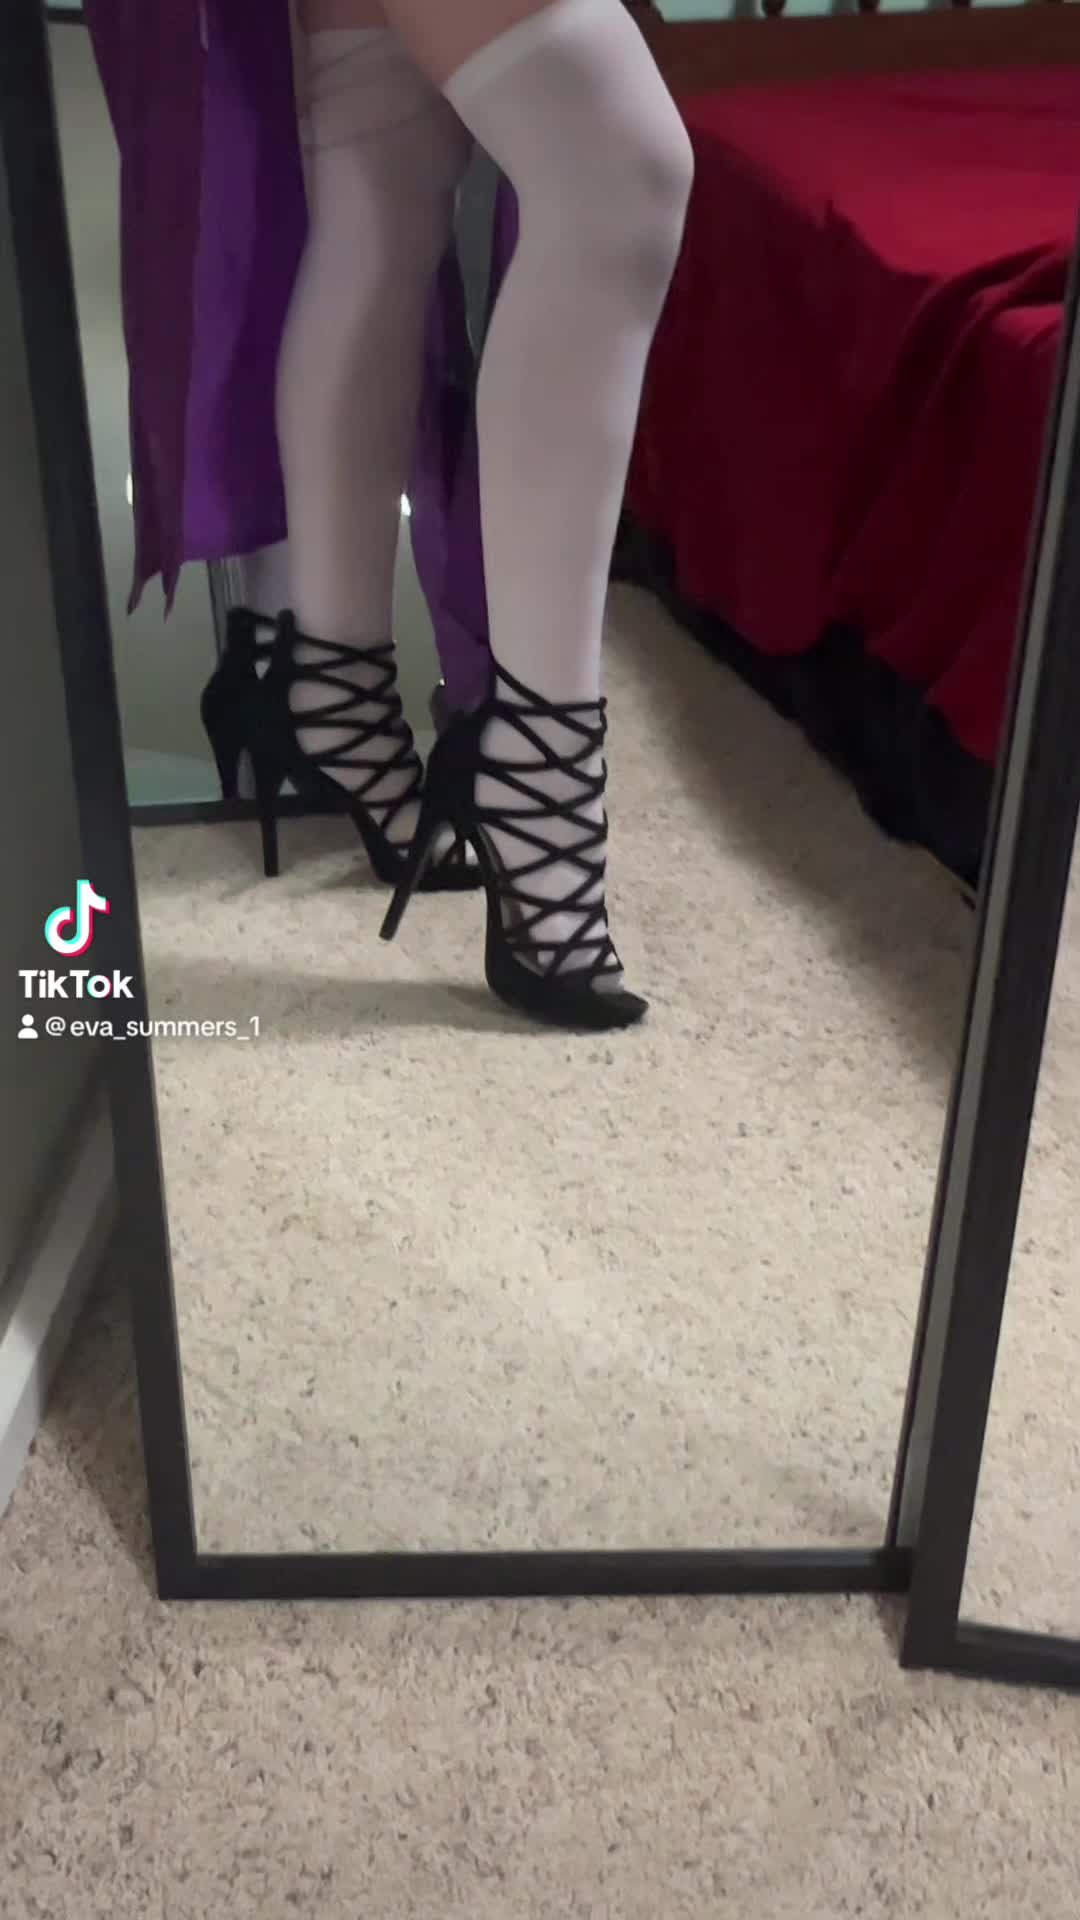 Video by Evasummers with the username @Evasummers, who is a star user,  March 6, 2024 at 11:00 PM. The post is about the topic NSFW TikTok and the text says '#girls #fyp #usa #blonde #thighhighs #petite #cosplay #princesszelda #zelda #highheels #cosplaygirls #princesszeldacosplay #zeldacosplay #cosplayers #meme #adultcontent #adulthumor #contentcreator #foryou #onlyfans #onlyfansgirls #foryou #midriff #belly..'